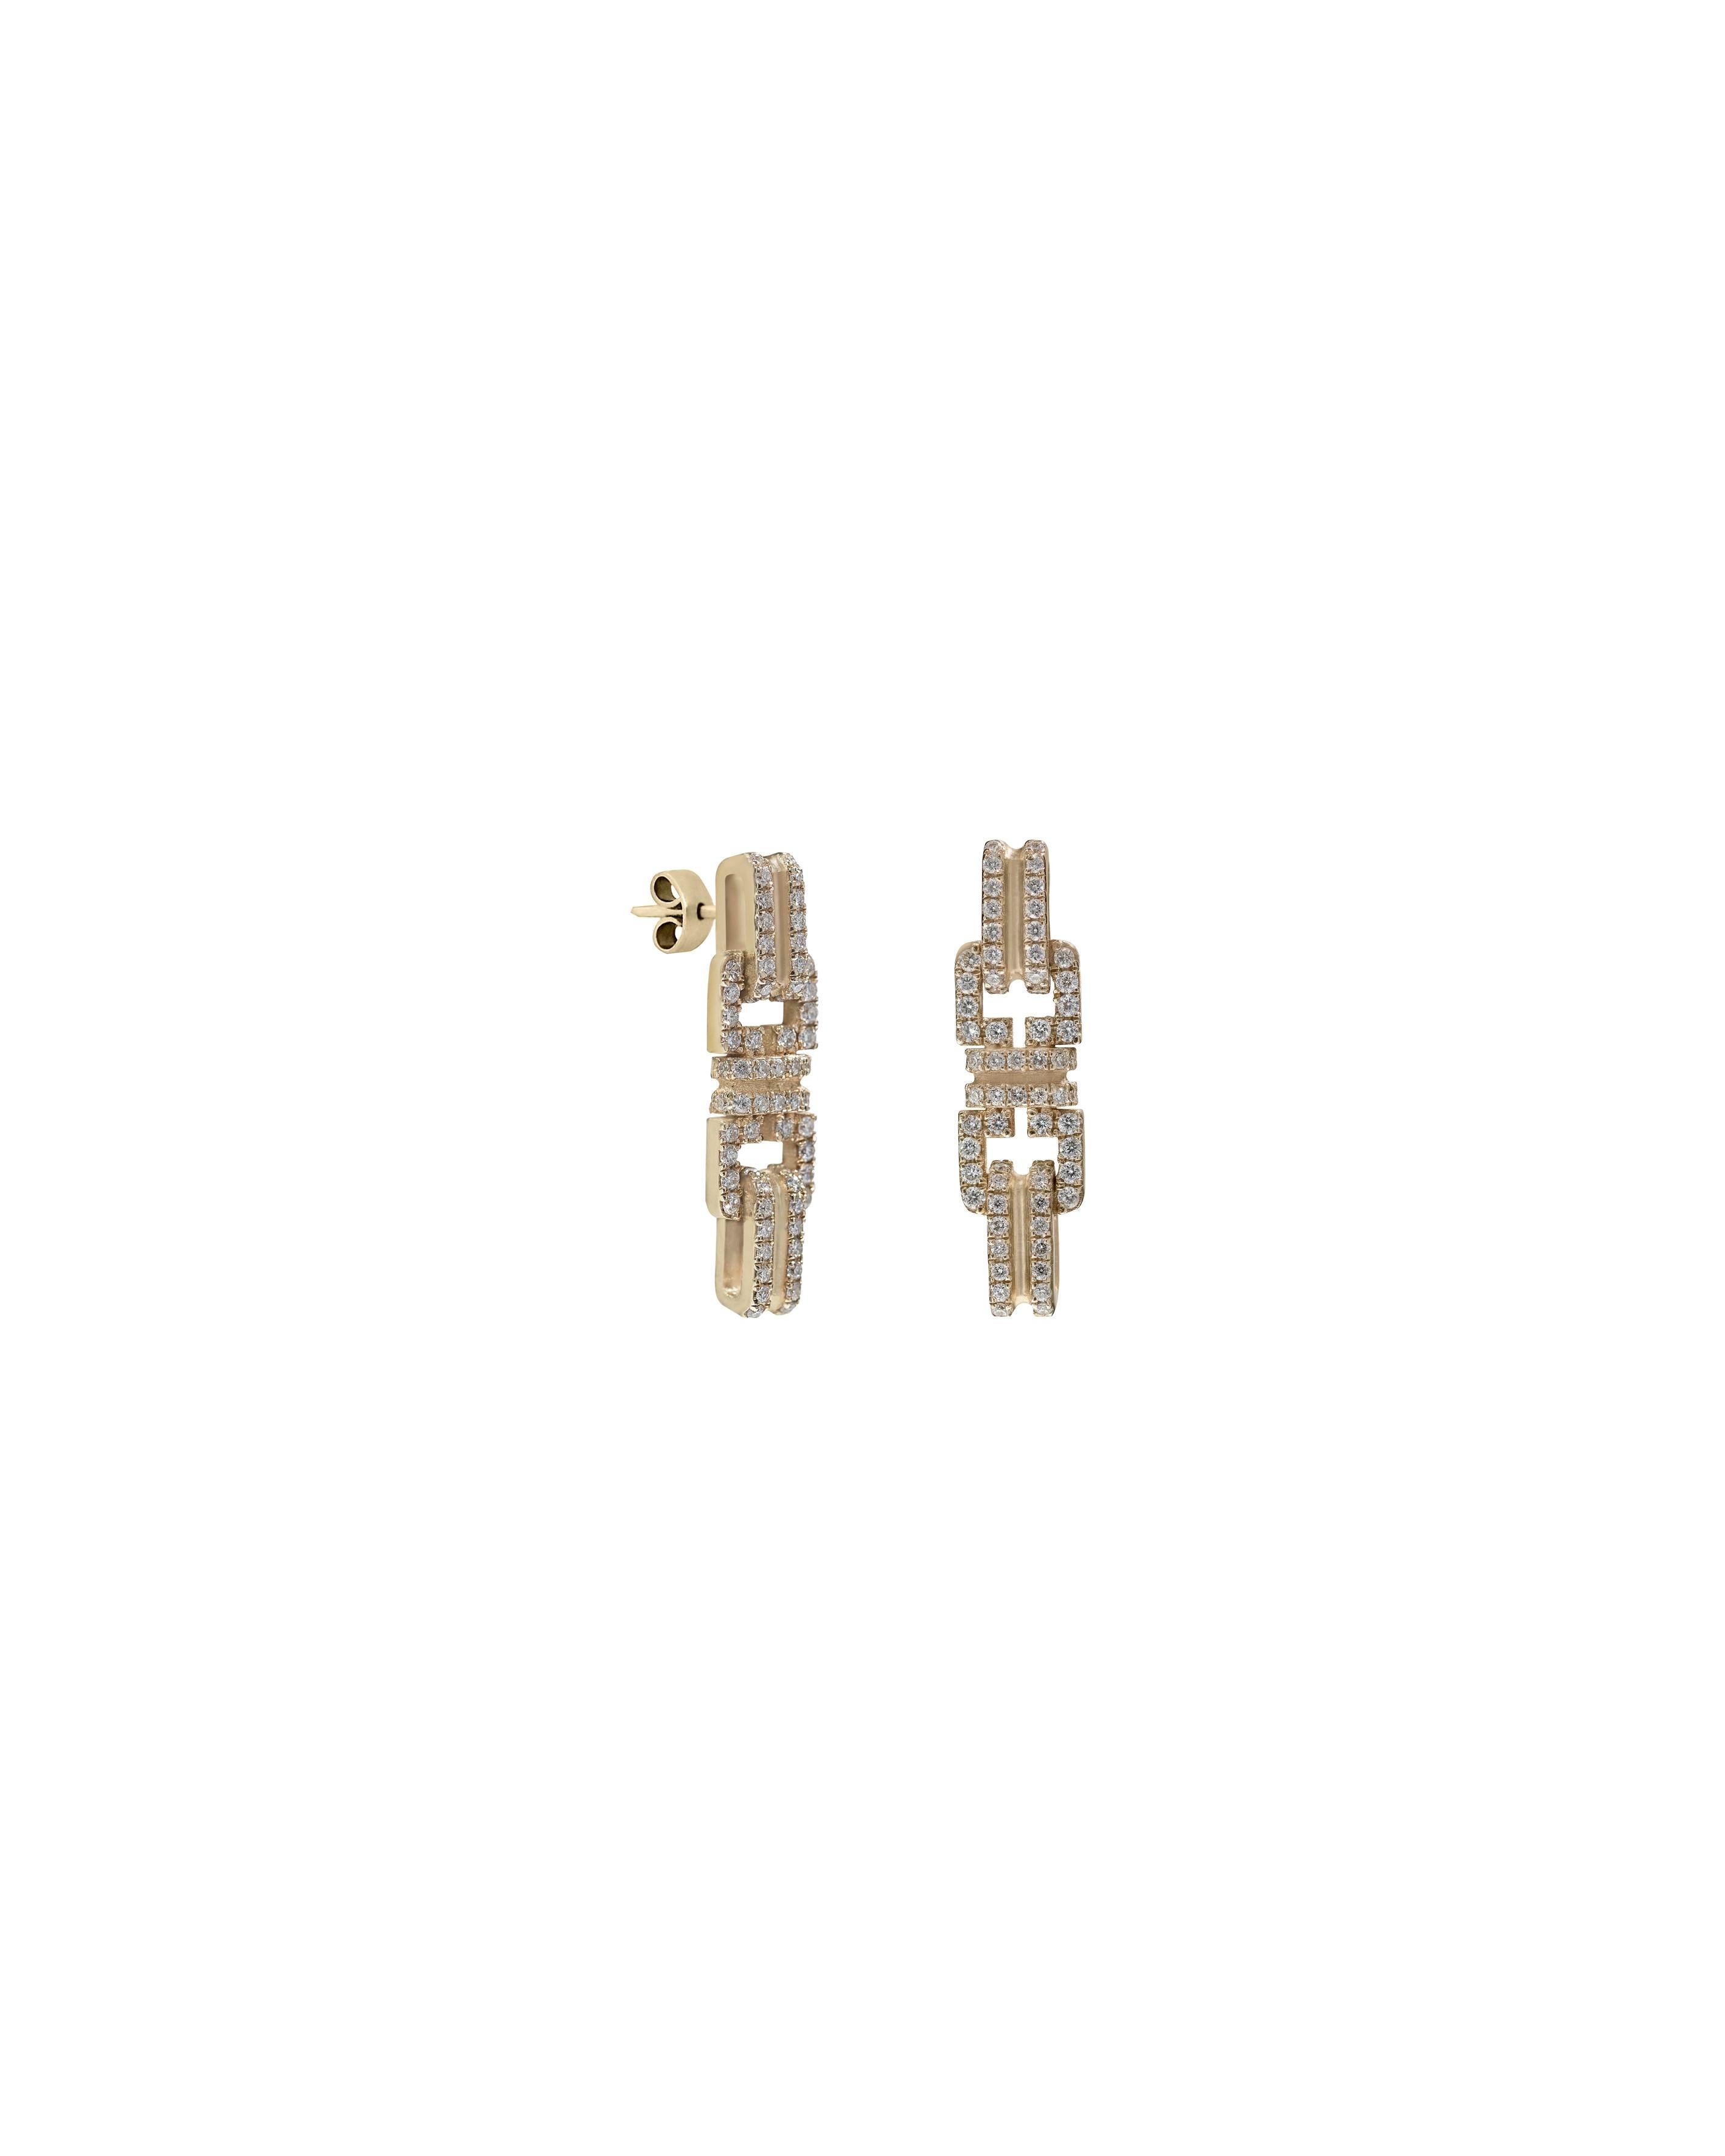 These earrings from POLINA ELLIS' ENOSIS collection are handcrafted in 18K raw white gold with 0,33ct white brilliant cut diamonds.
Length: 2,00cm
Width: 0,55cm